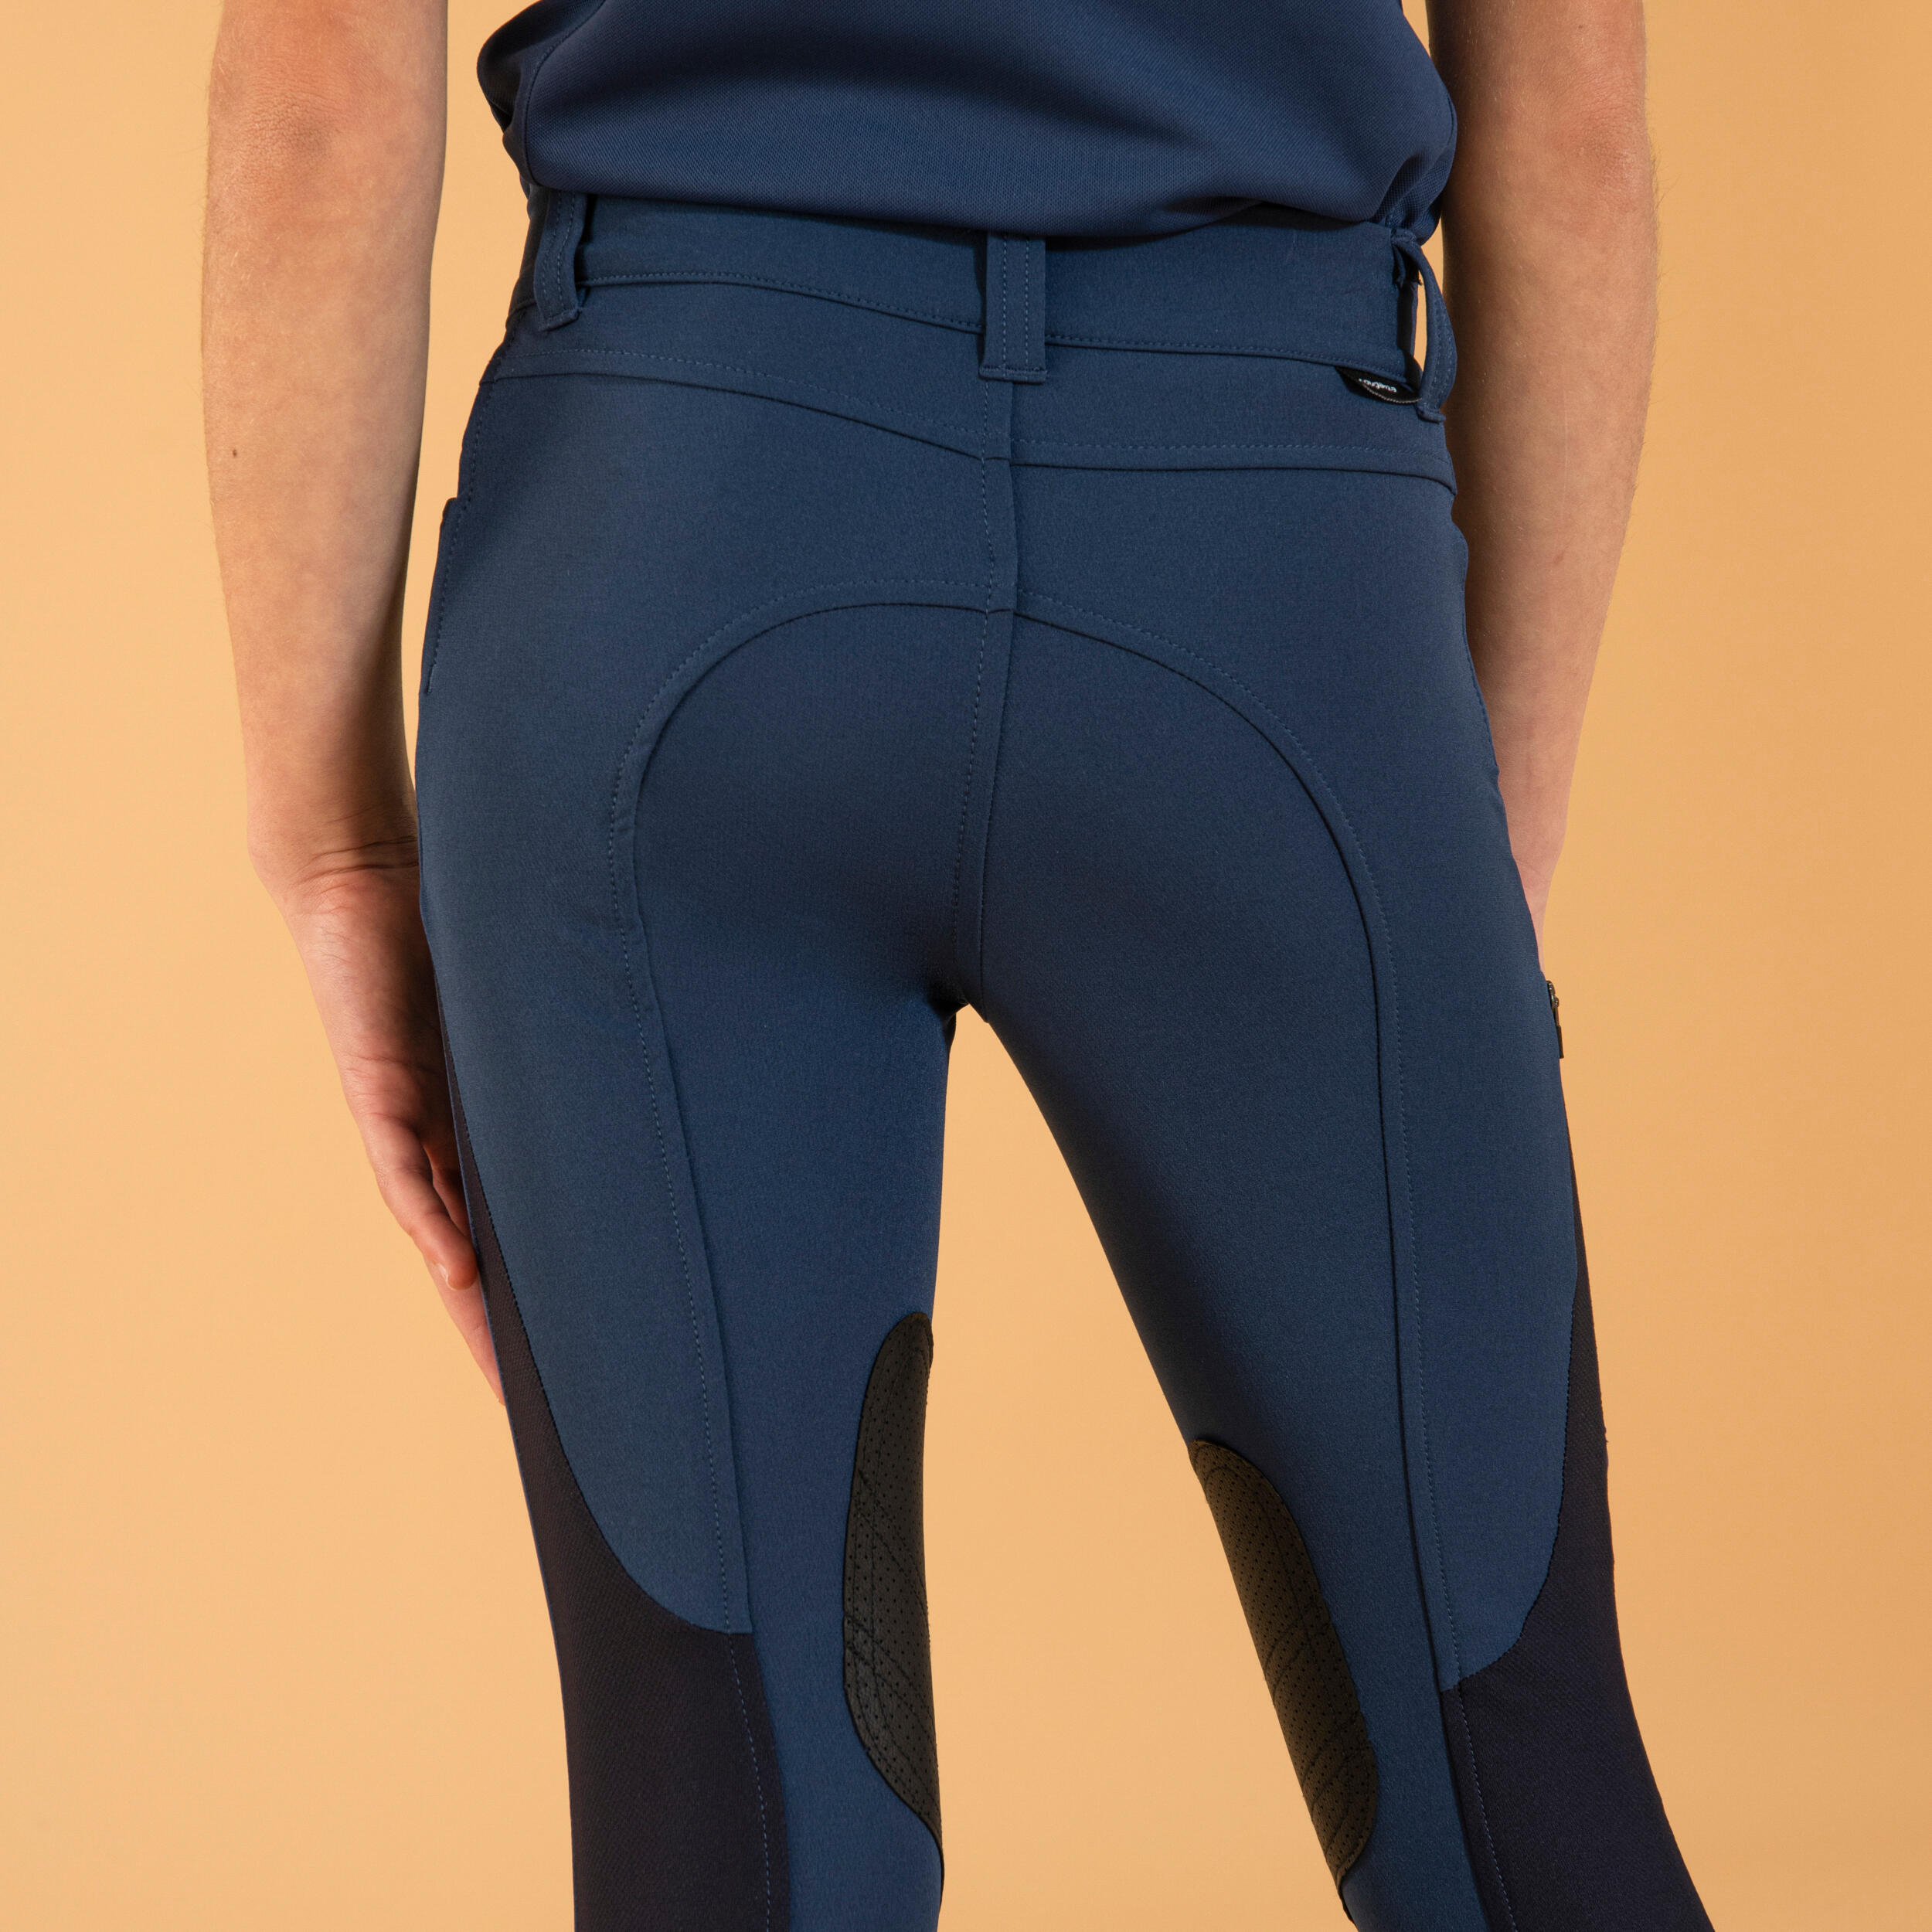 Kids' Horse Riding Lightweight Mesh Jodhpurs with Grippy Suede Patches - 500 Blue - FOUGANZA